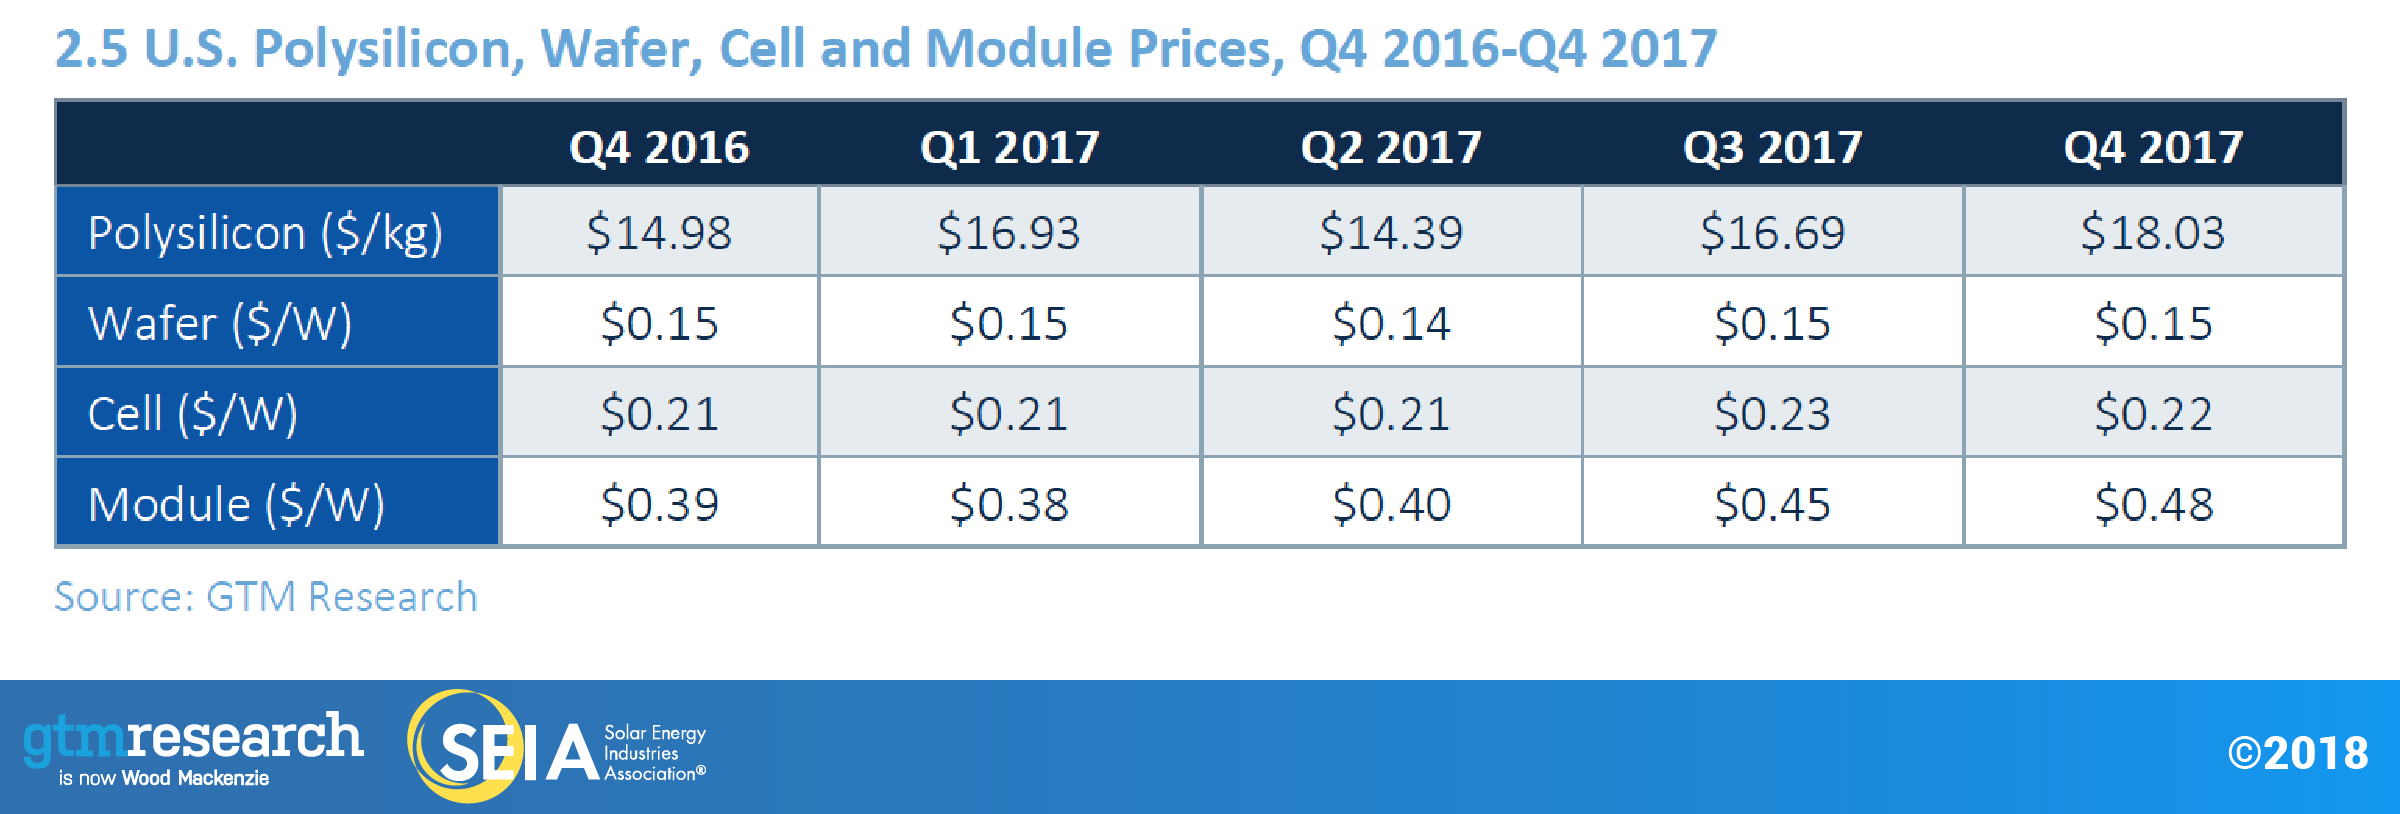 U.S. Polysilicon, Wafer, Cell and Module Prices, Q4 2016-Q4 2017